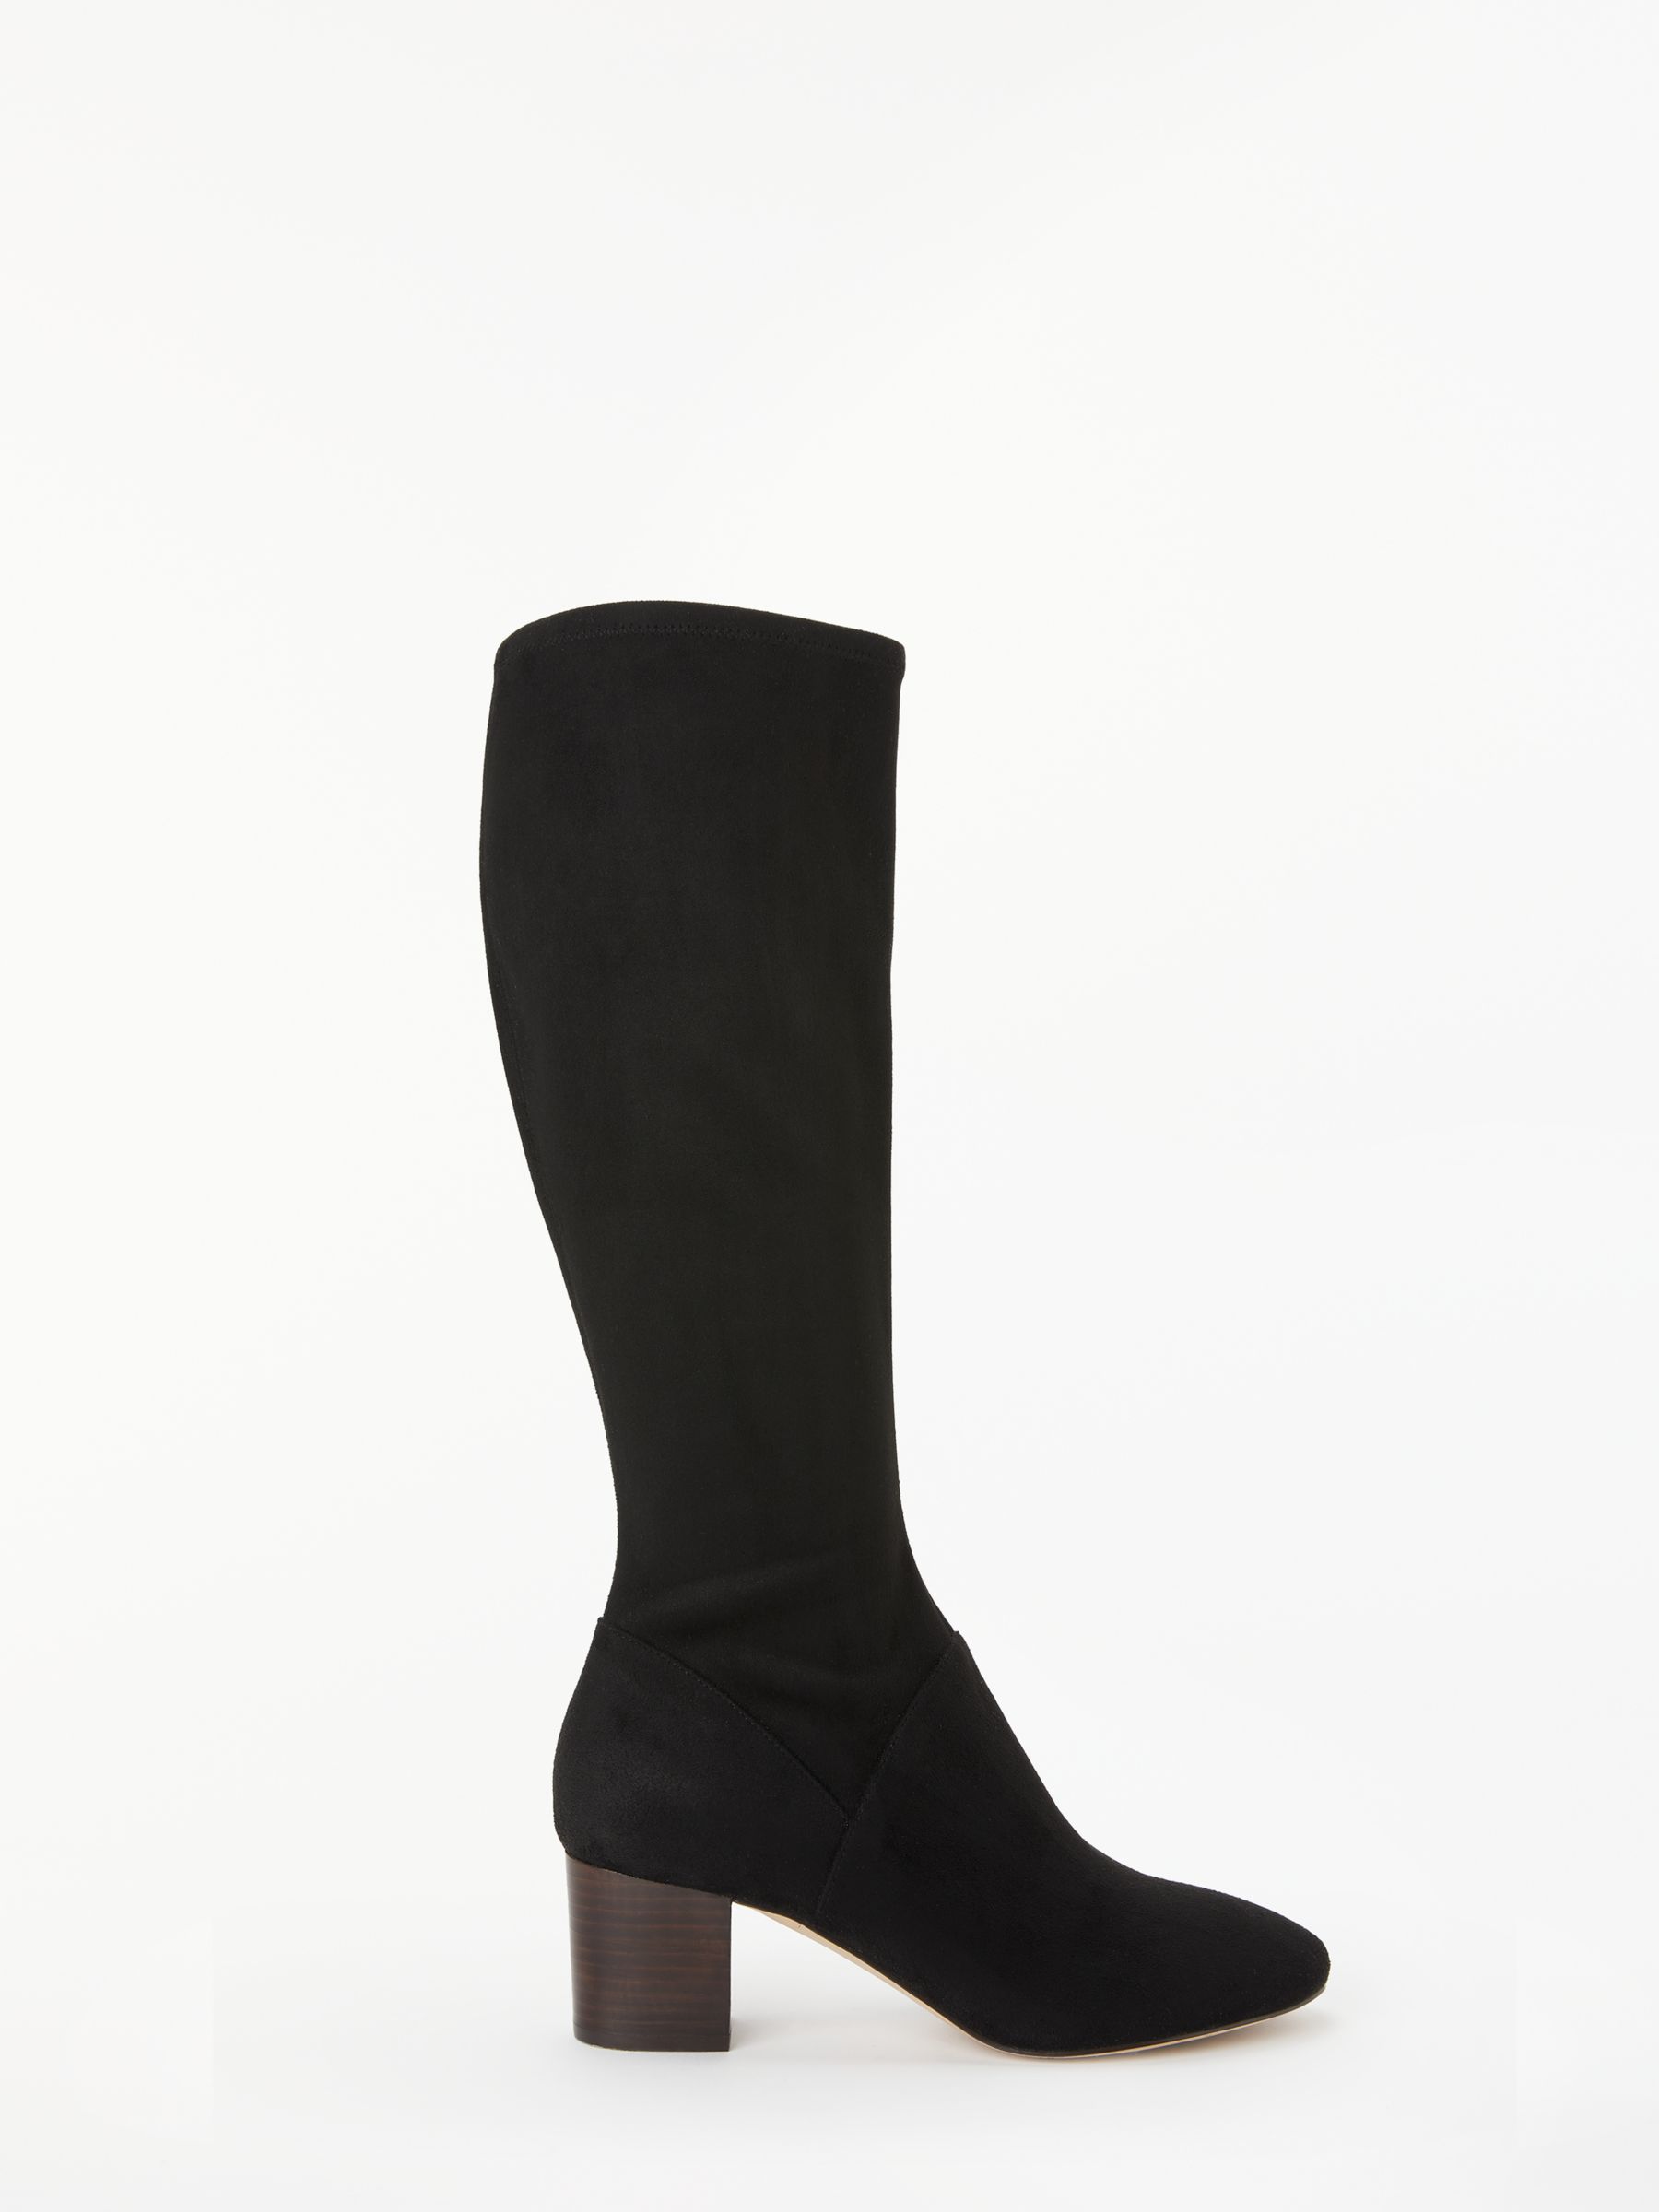 Boden Round Toe Stretch Boots at John Lewis & Partners